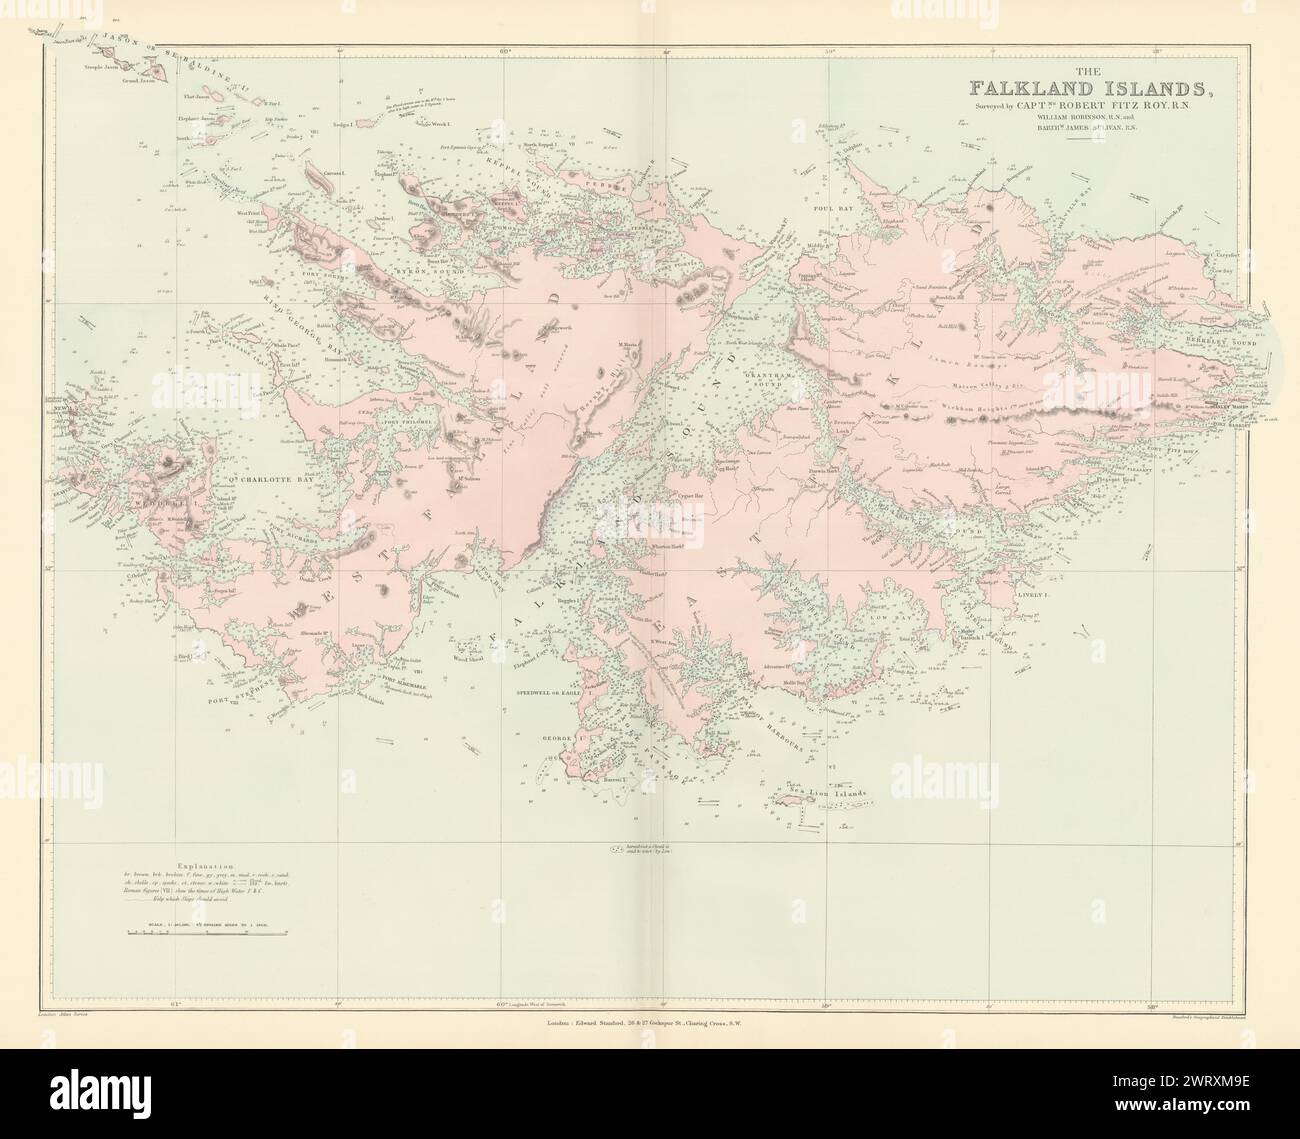 The Falkland Islands surveyed by Captain Robert Fitzroy. STANFORD 1896 old map Stock Photo